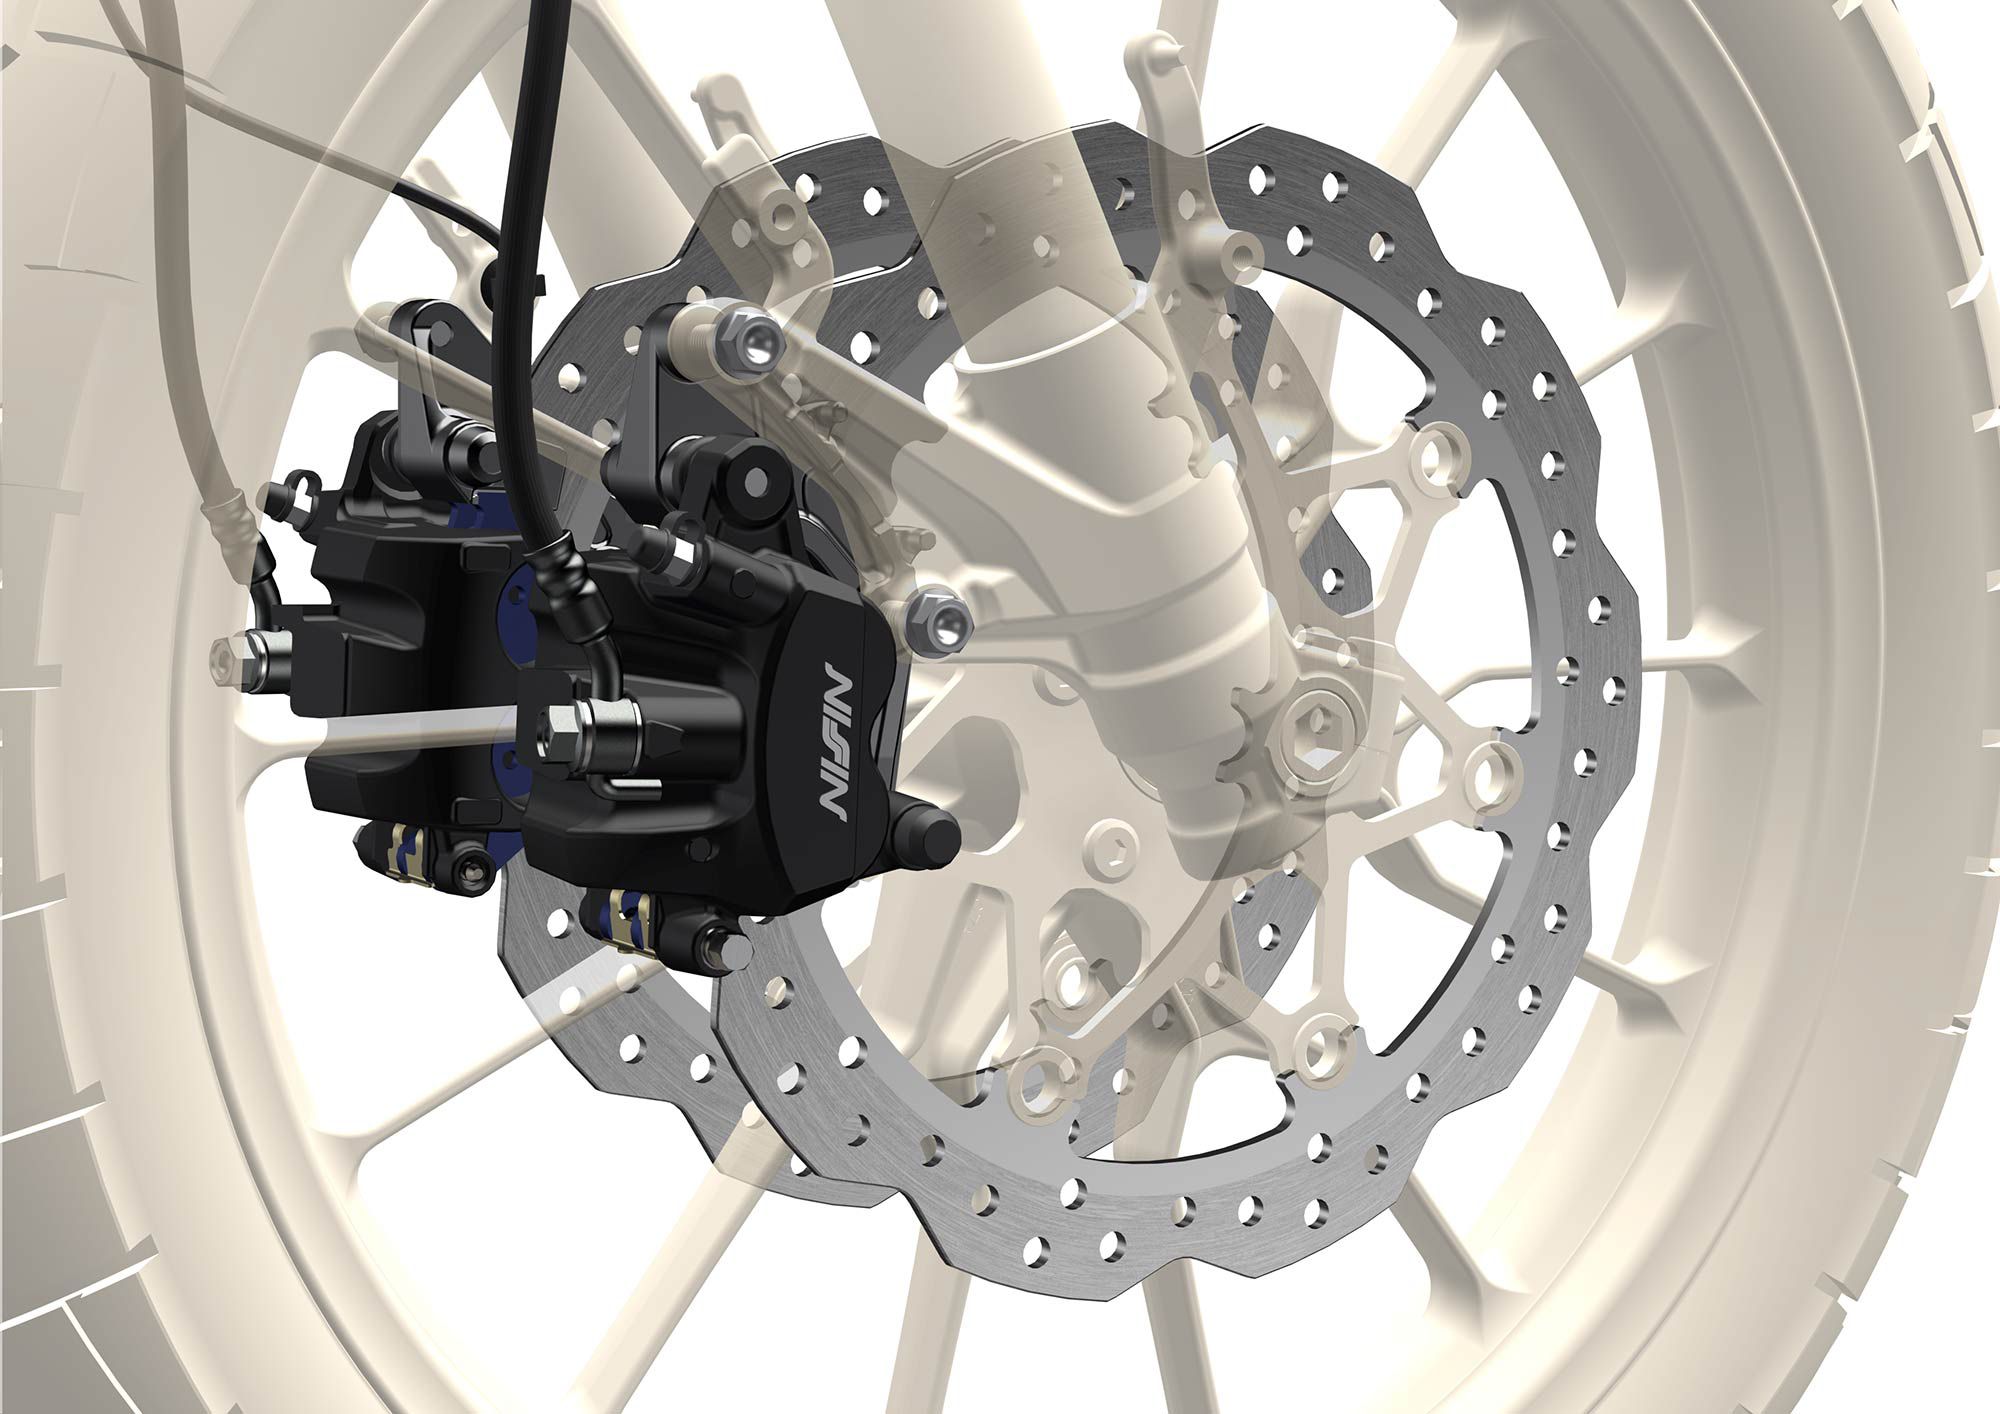 The 2022 CB500X’s dual 296mm petal-style rotors (versus single 310mm brake disc on the 2021 model) and axial-mounted Nissin two-piston calipers require less lever pressure when braking, while keeping any weight gain to a minimum.